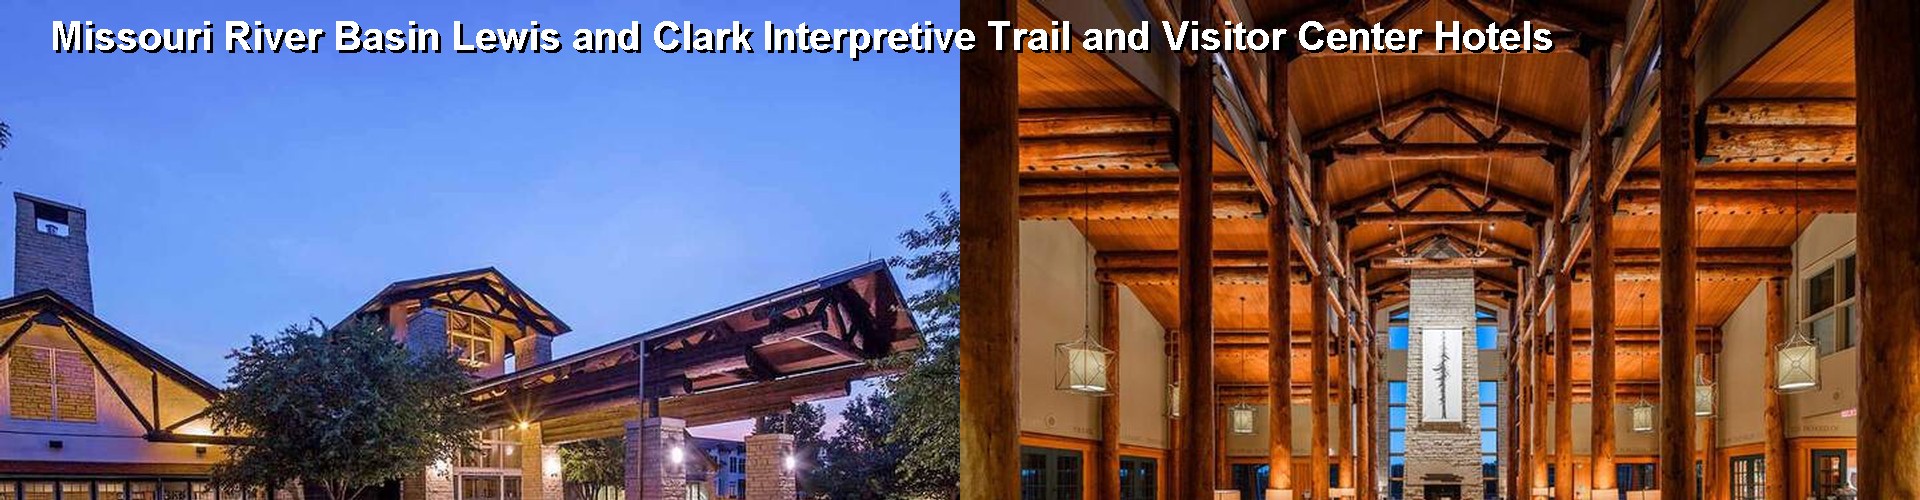 4 Best Hotels near Missouri River Basin Lewis and Clark Interpretive Trail and Visitor Center